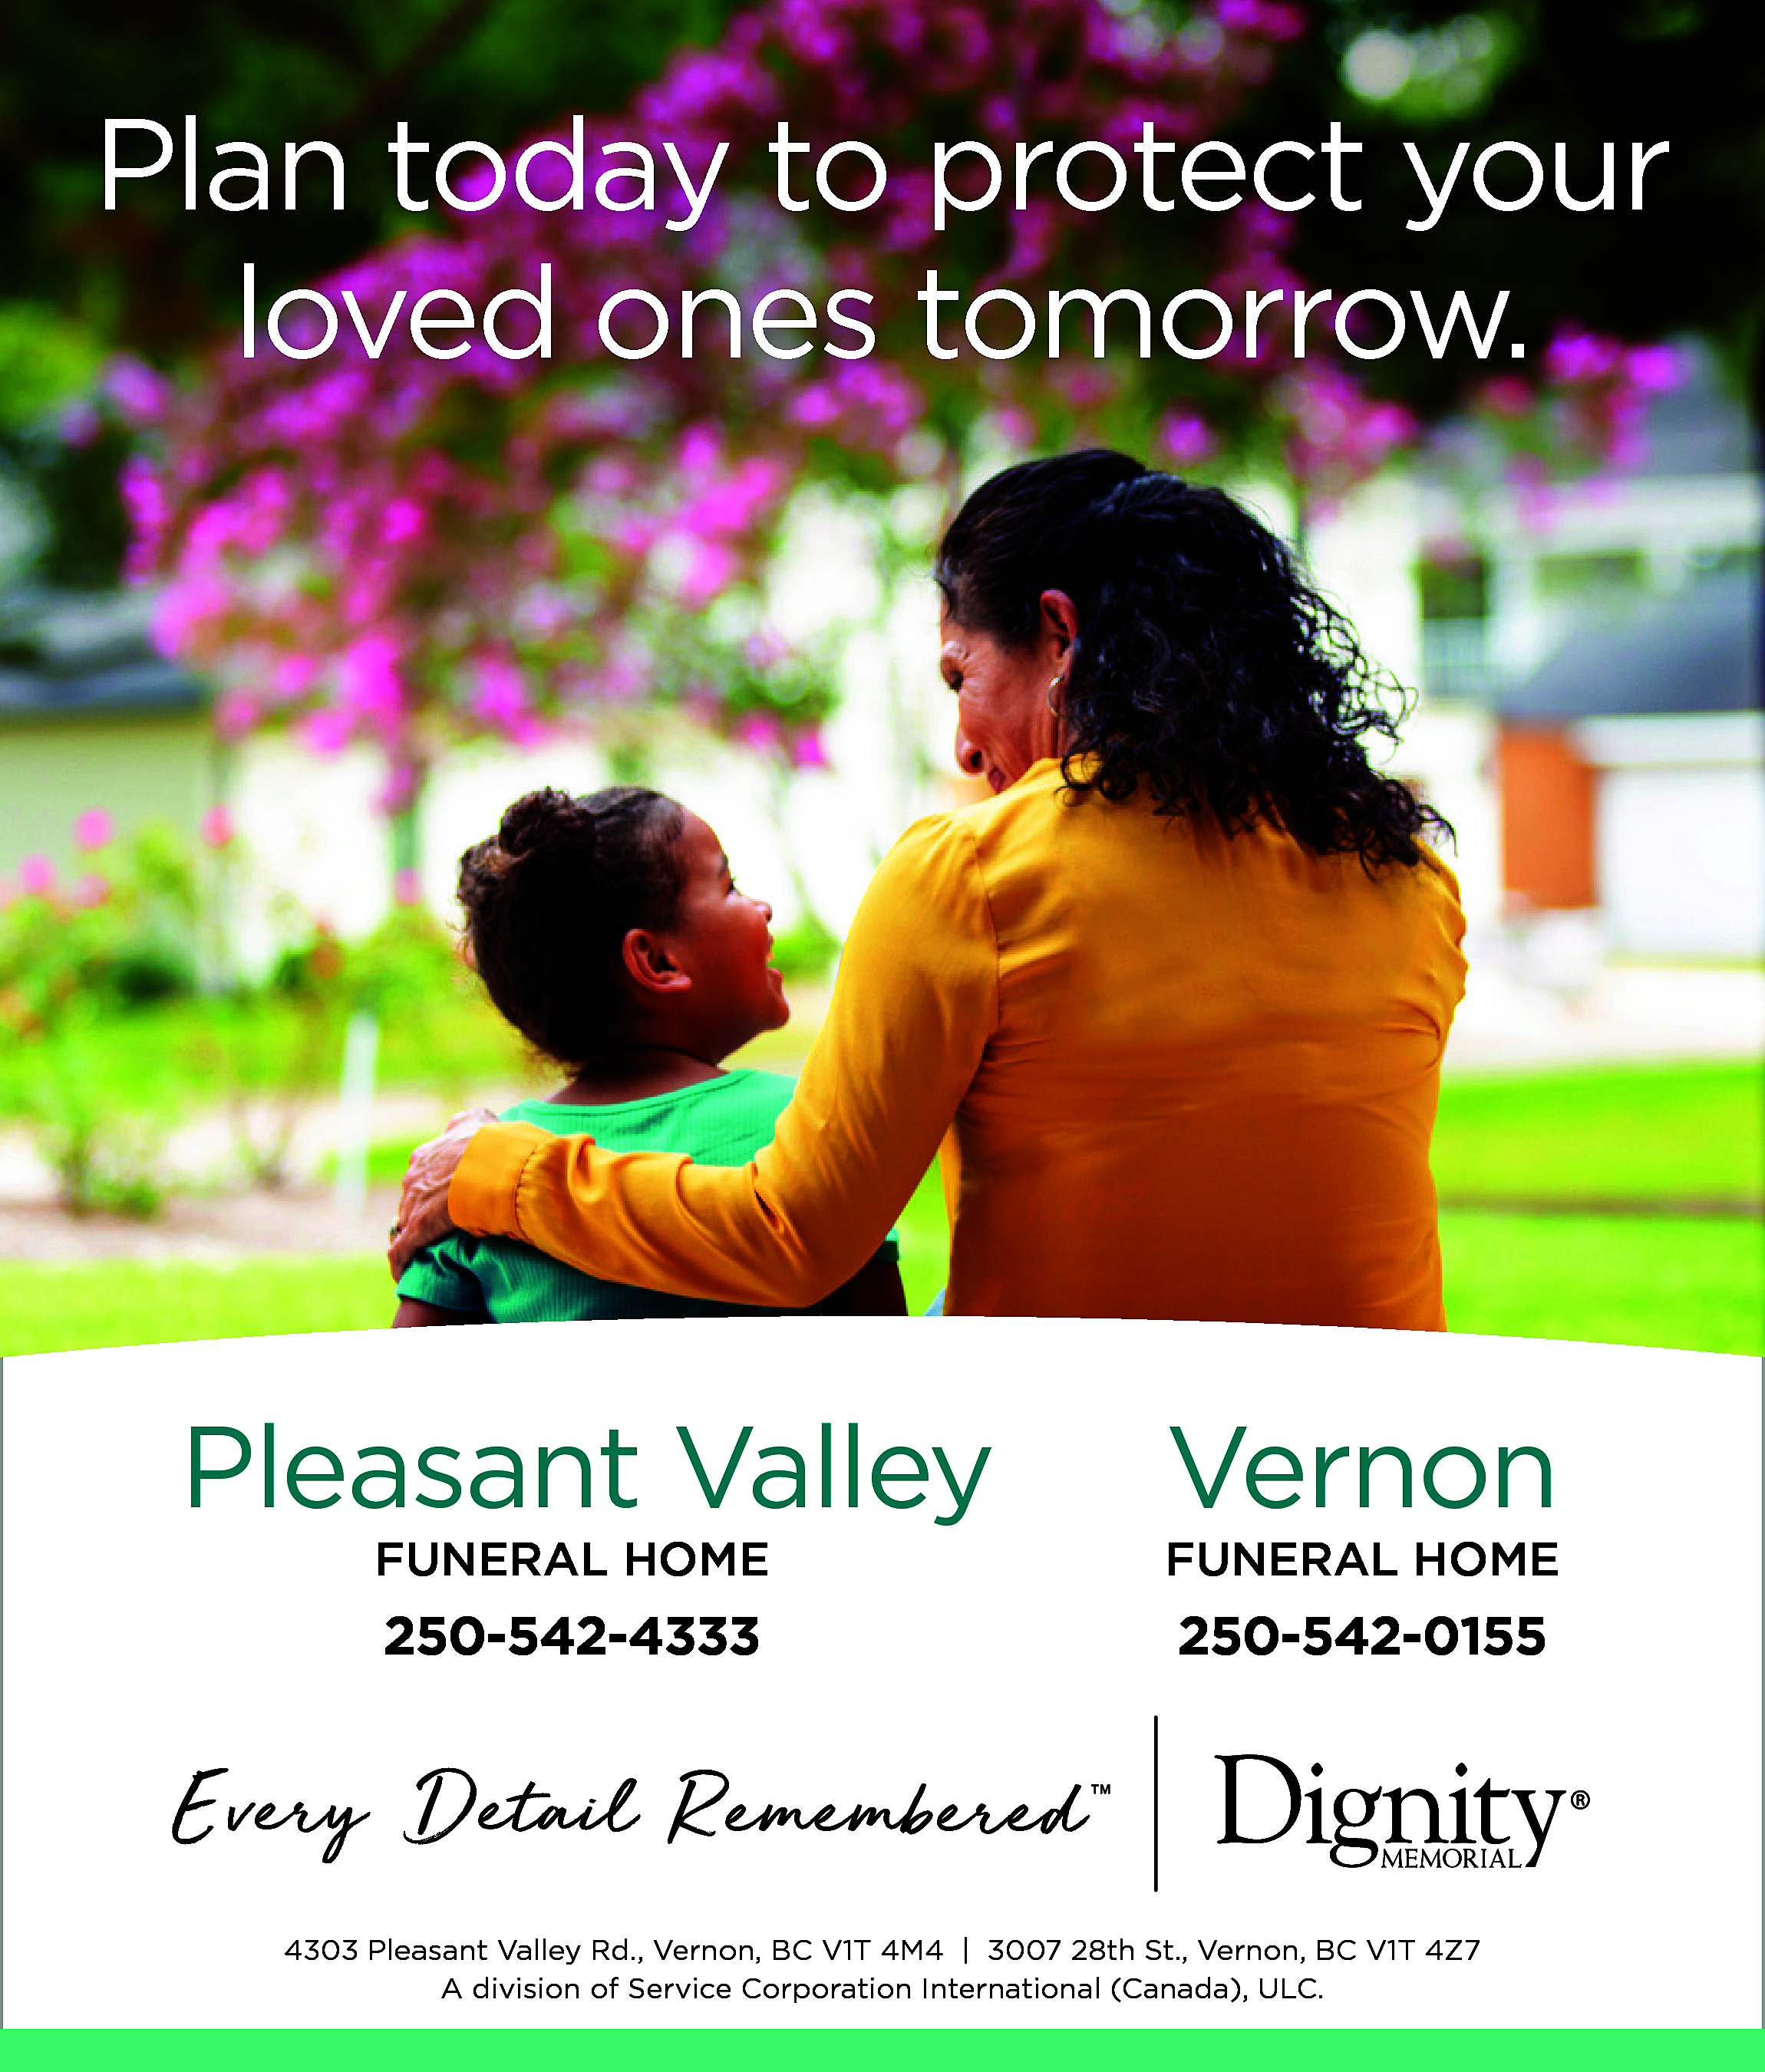 Plan today to protect your  Plan today to protect your  loved ones tomorrow.    Pleasant Valley    Vernon    FUNERAL HOME    FUNERAL HOME    250-542-4333    250-542-0155    4303 Pleasant Valley Rd., Vernon, BC V1T 4M4 | 3007 28th St., Vernon, BC V1T 4Z7  A division of Service Corporation International (Canada), ULC.    